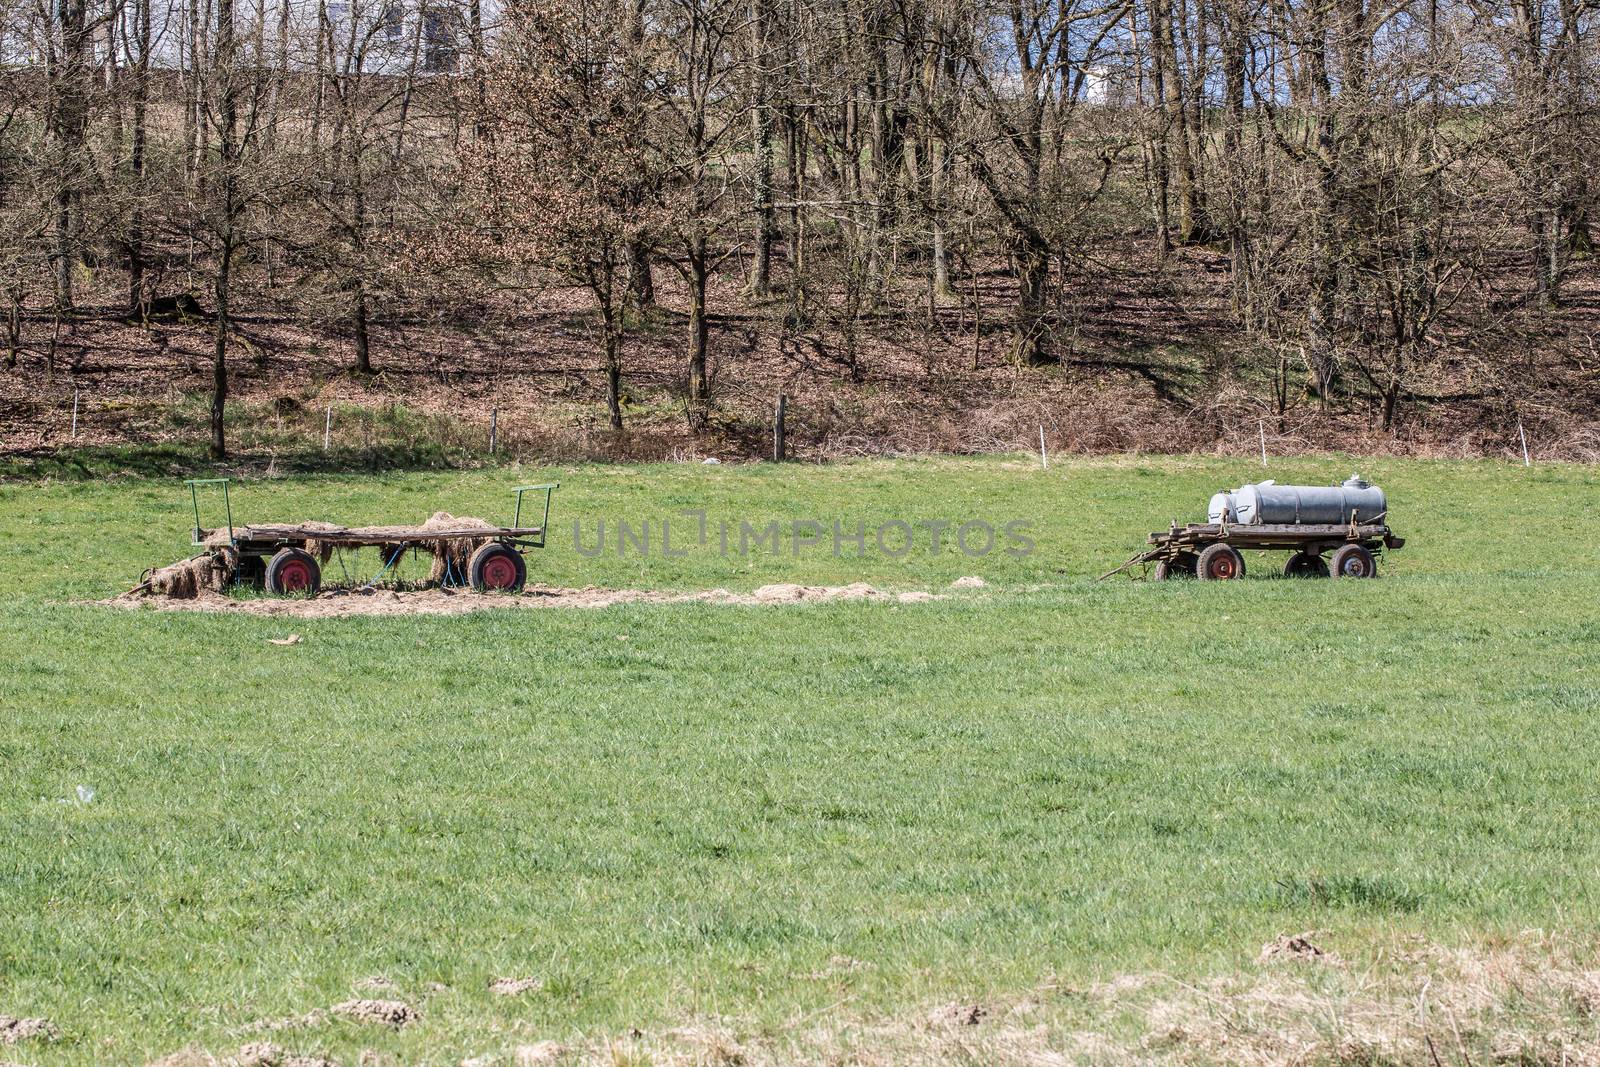 Agricultural equipment in the pasture